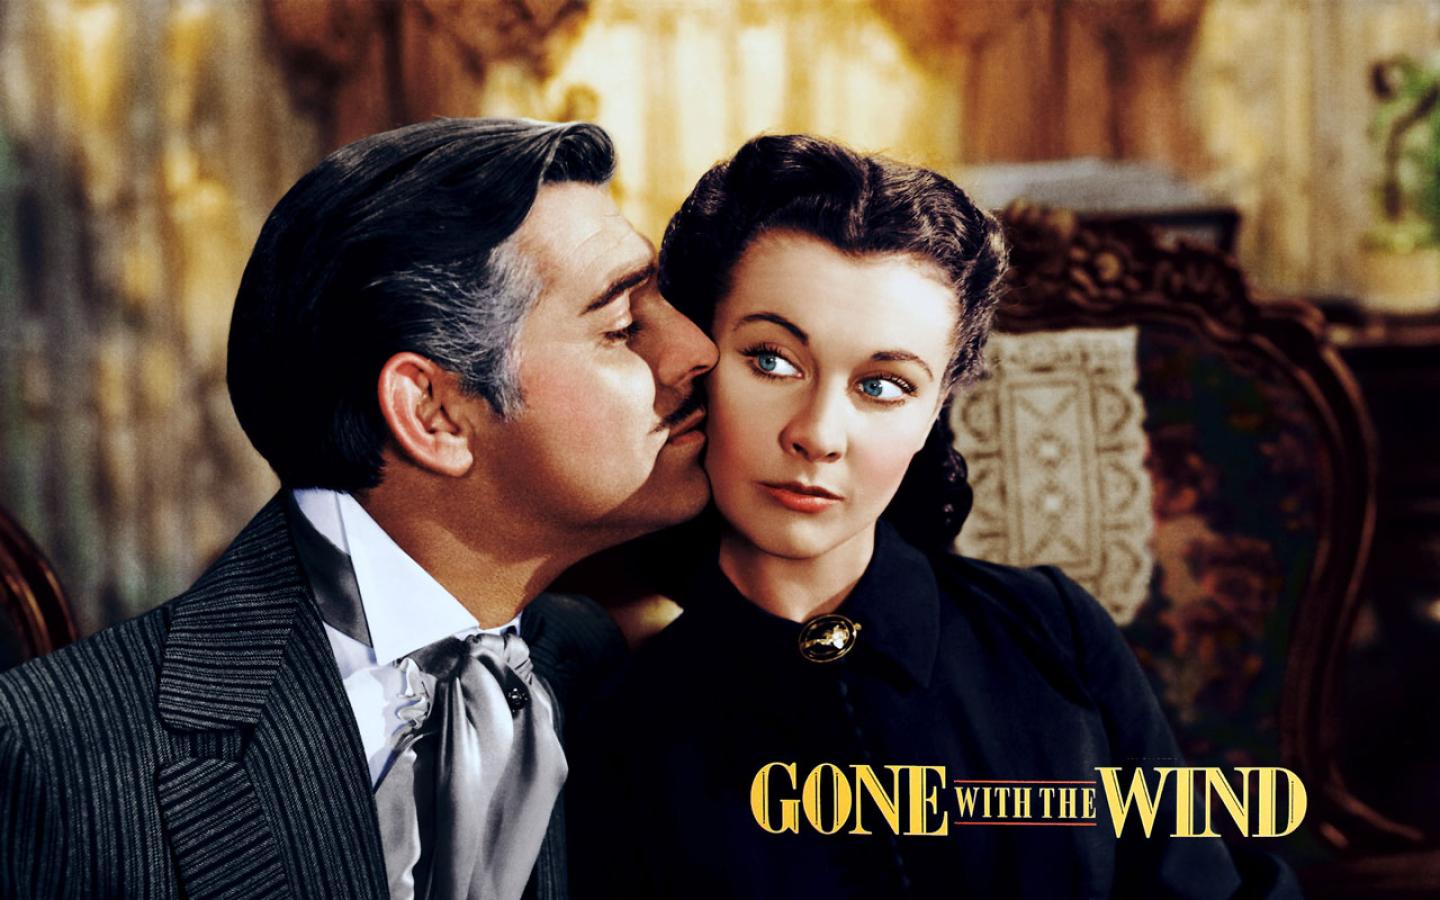 Gone With The Wind Wallpaper #2 1440 x 900 